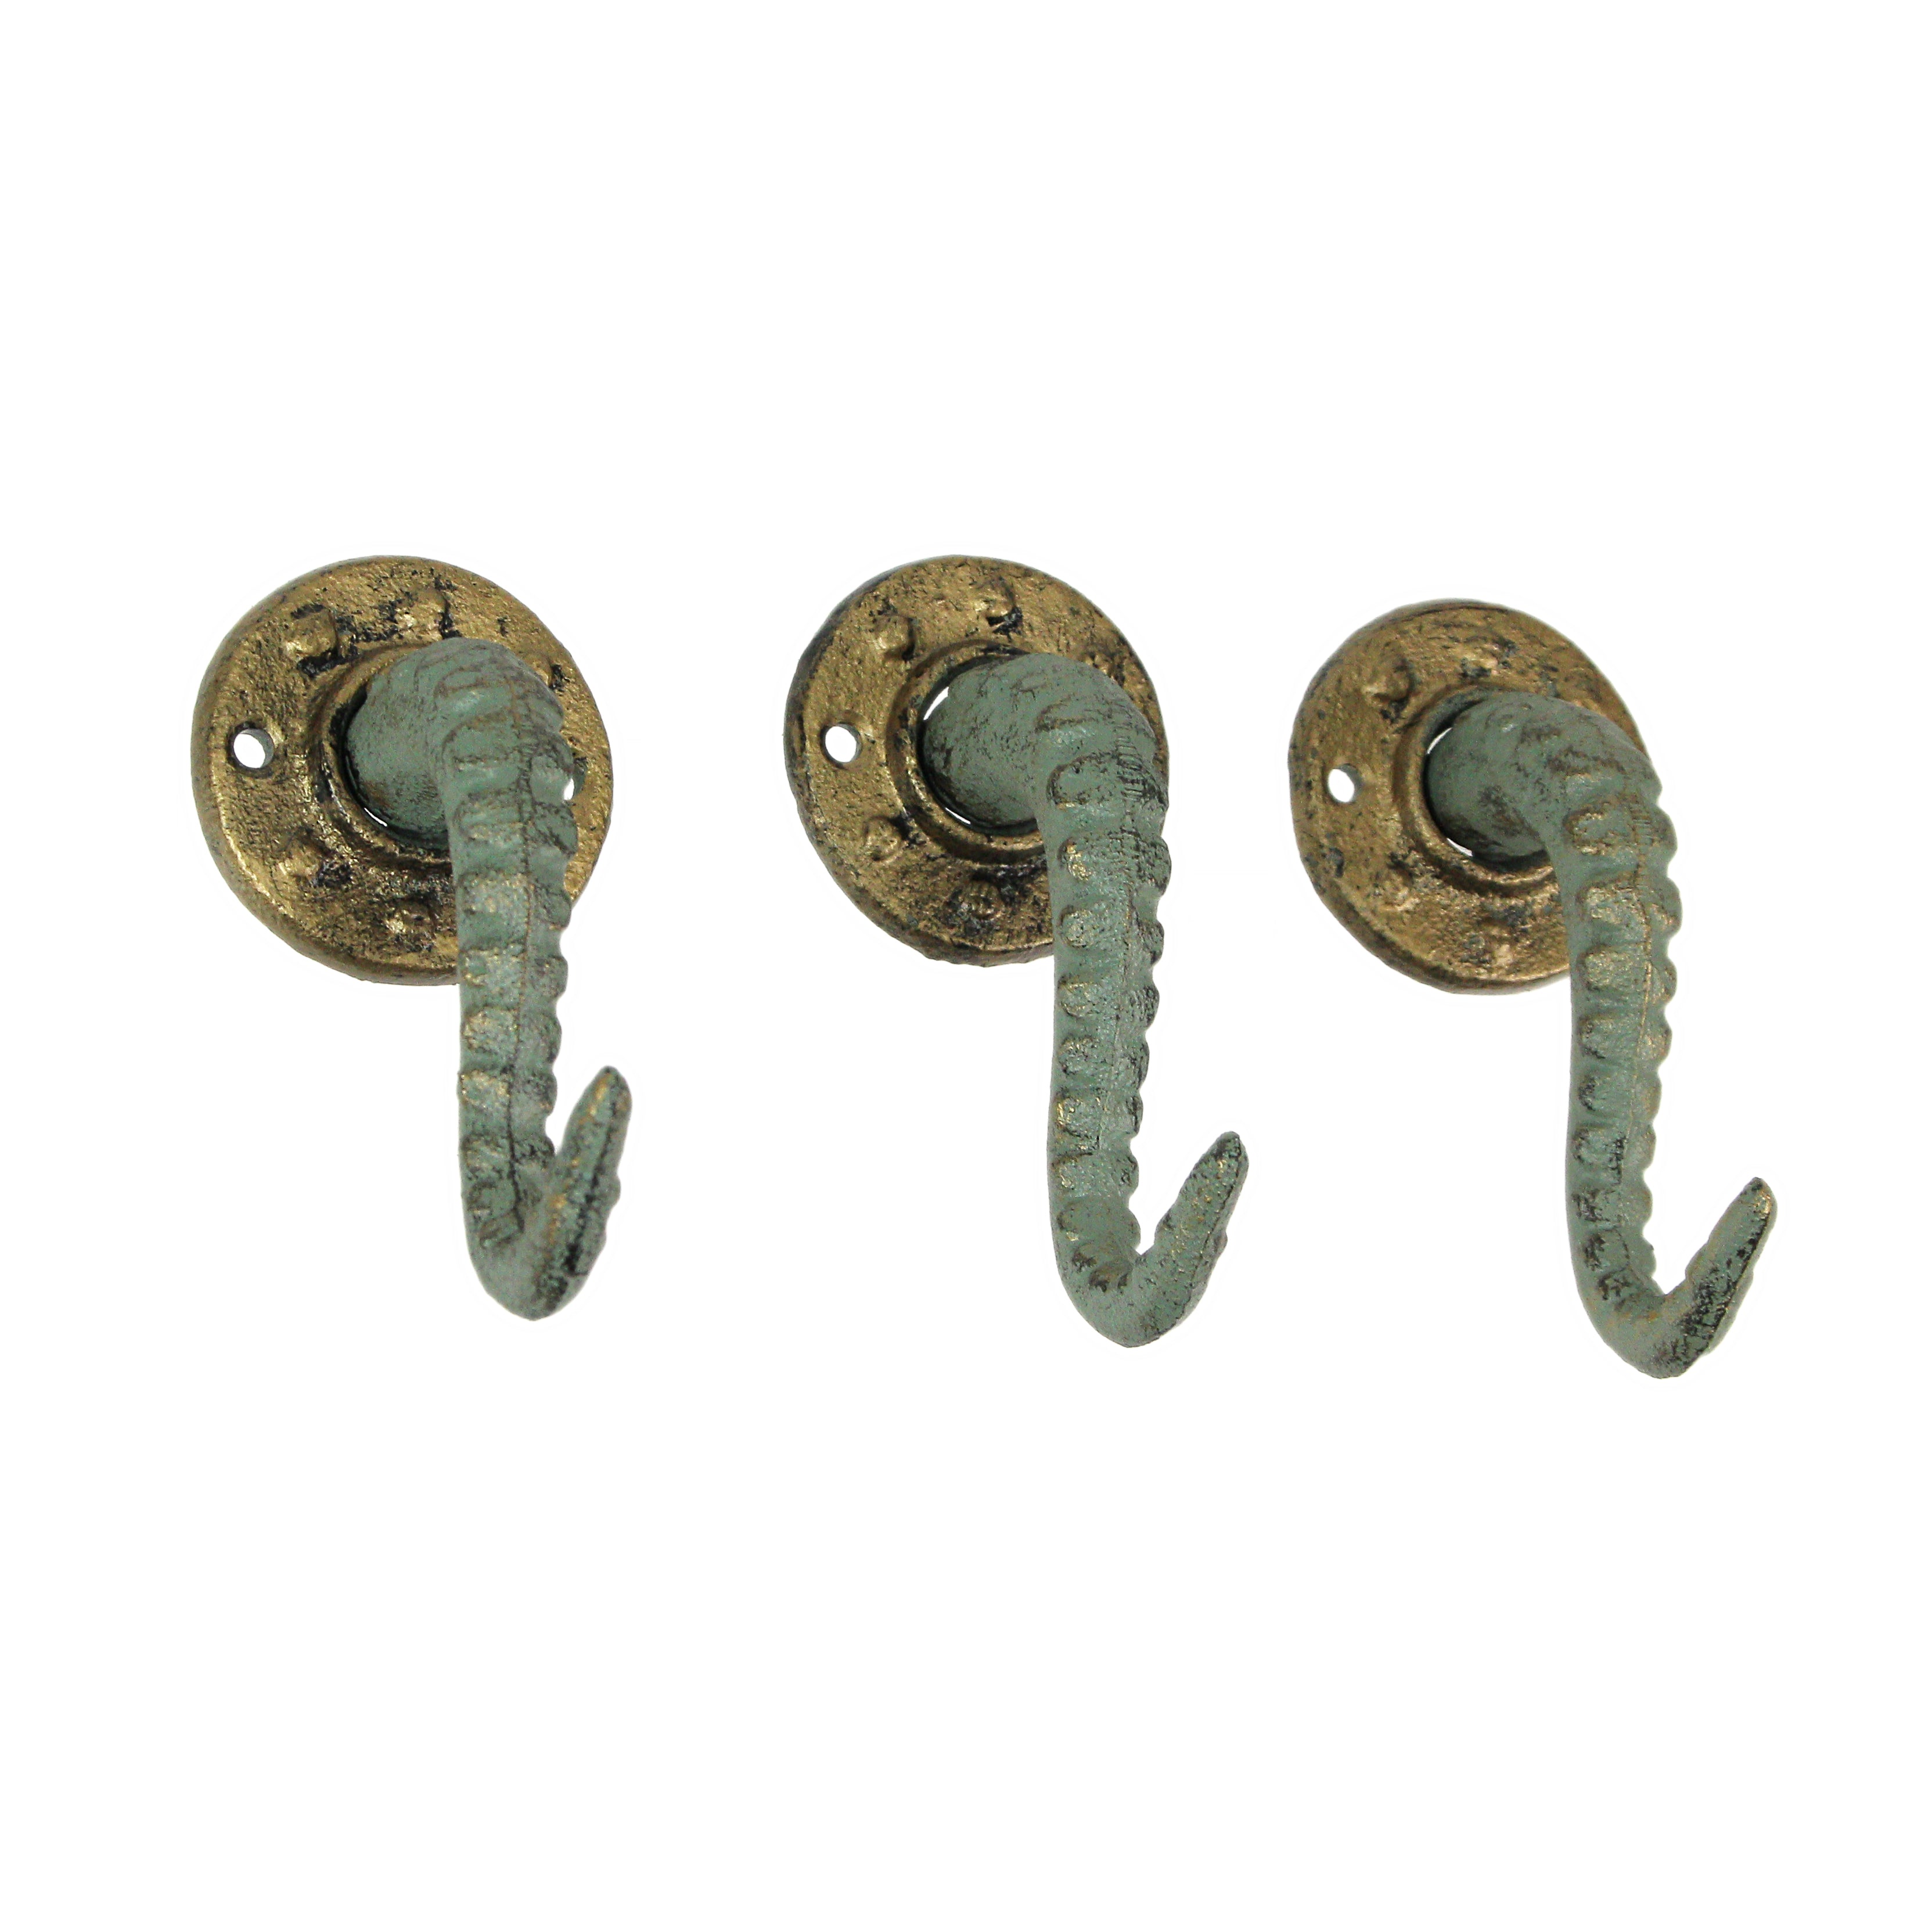 ChasBete Key Holder for Wall, Octopus Wall Hooks Decorative for Hanging,  Cast Iron Coat Hooks/Towel Hooks with 6 arms - Bronze